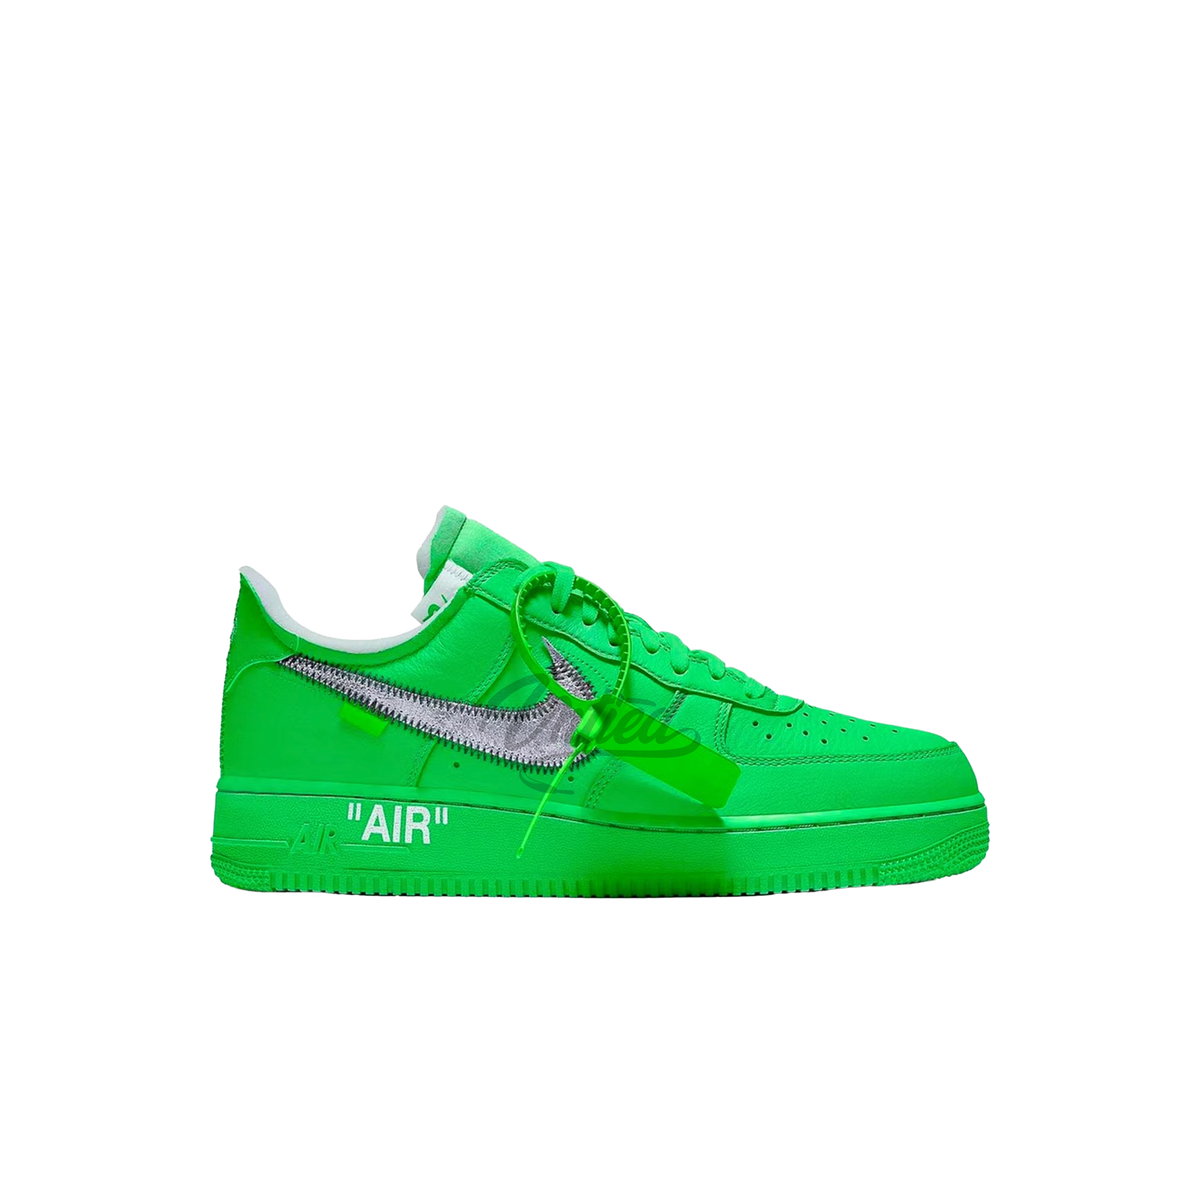 Air Force 1 X Off White Yellow